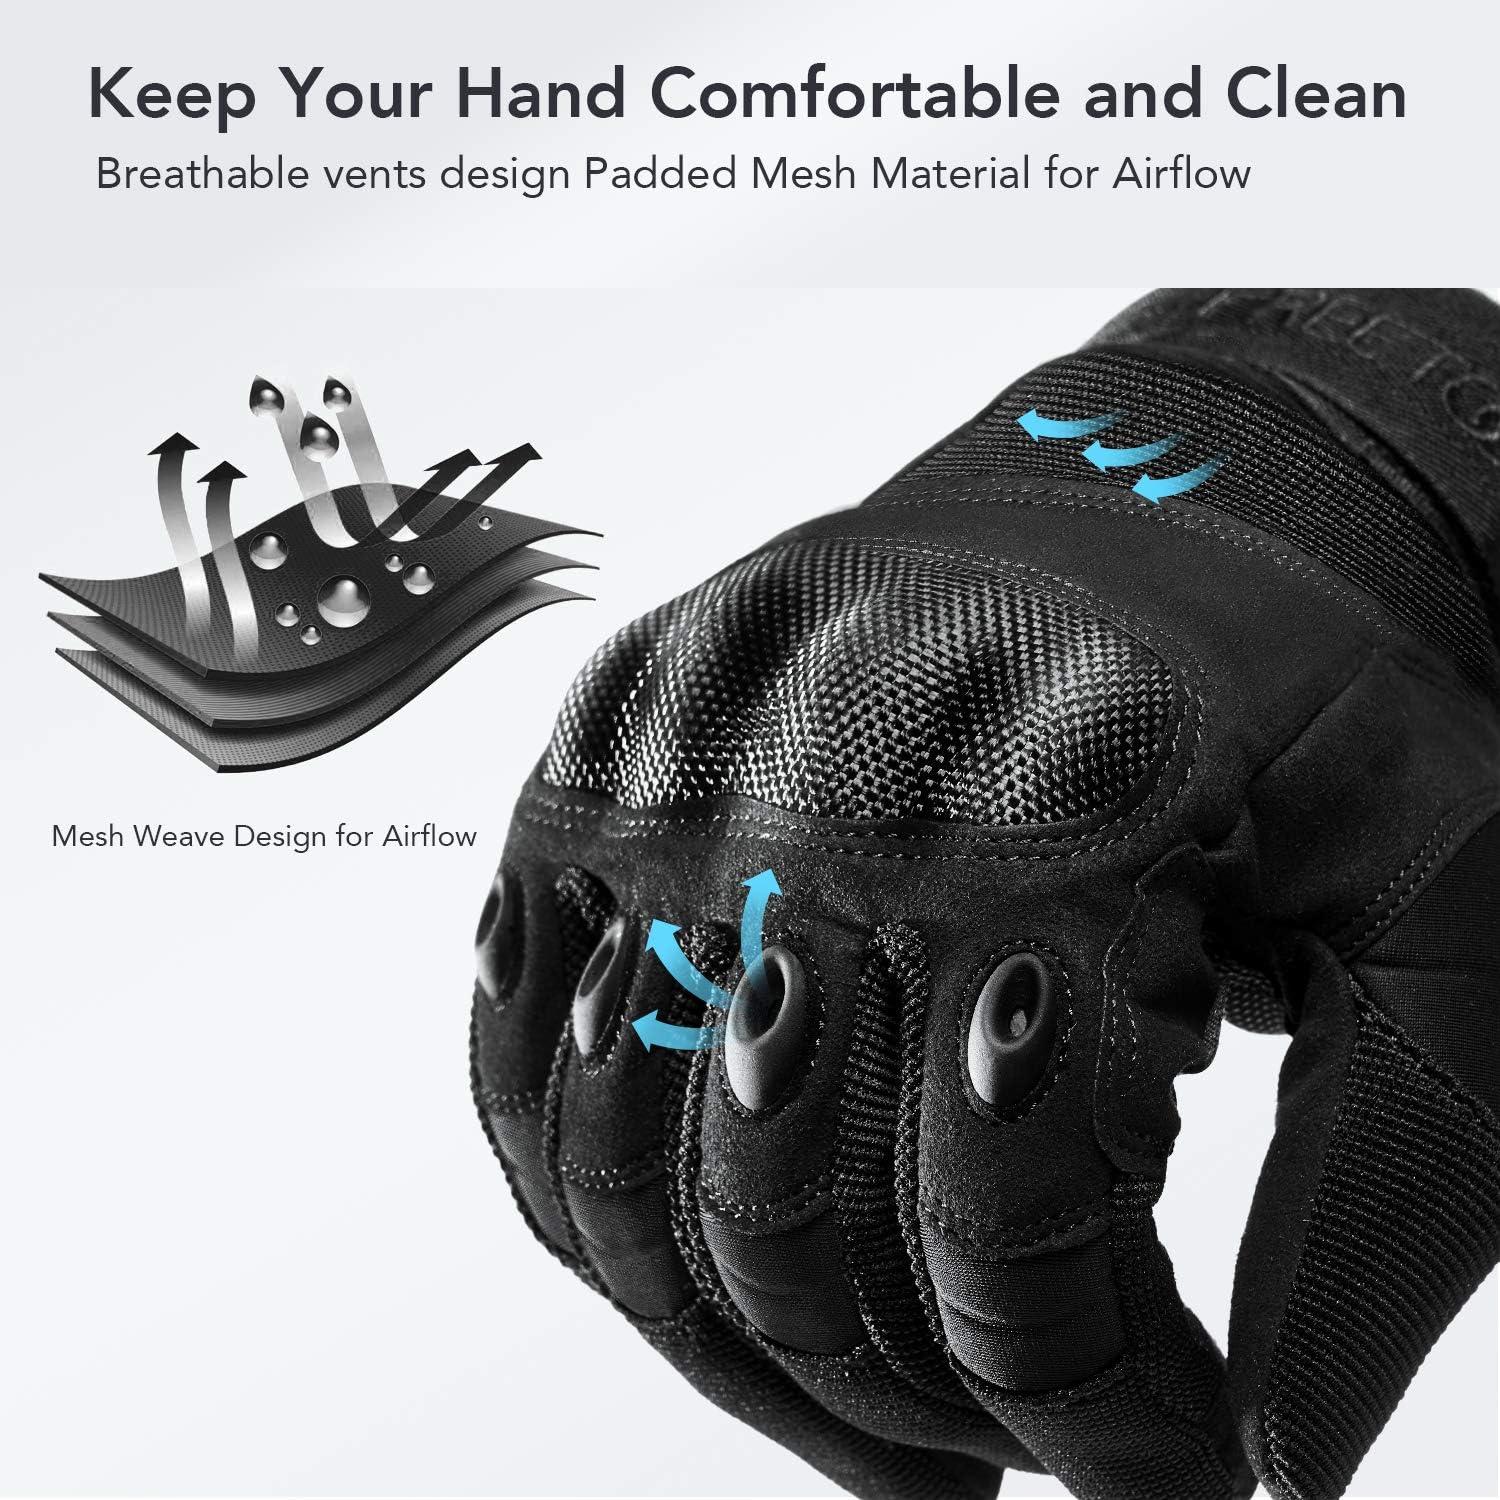 Generic FREETOO Mechanic Work Gloves, [Full Palm Protection] [Excellent Grip]  Working Gloves with Padded Leather for